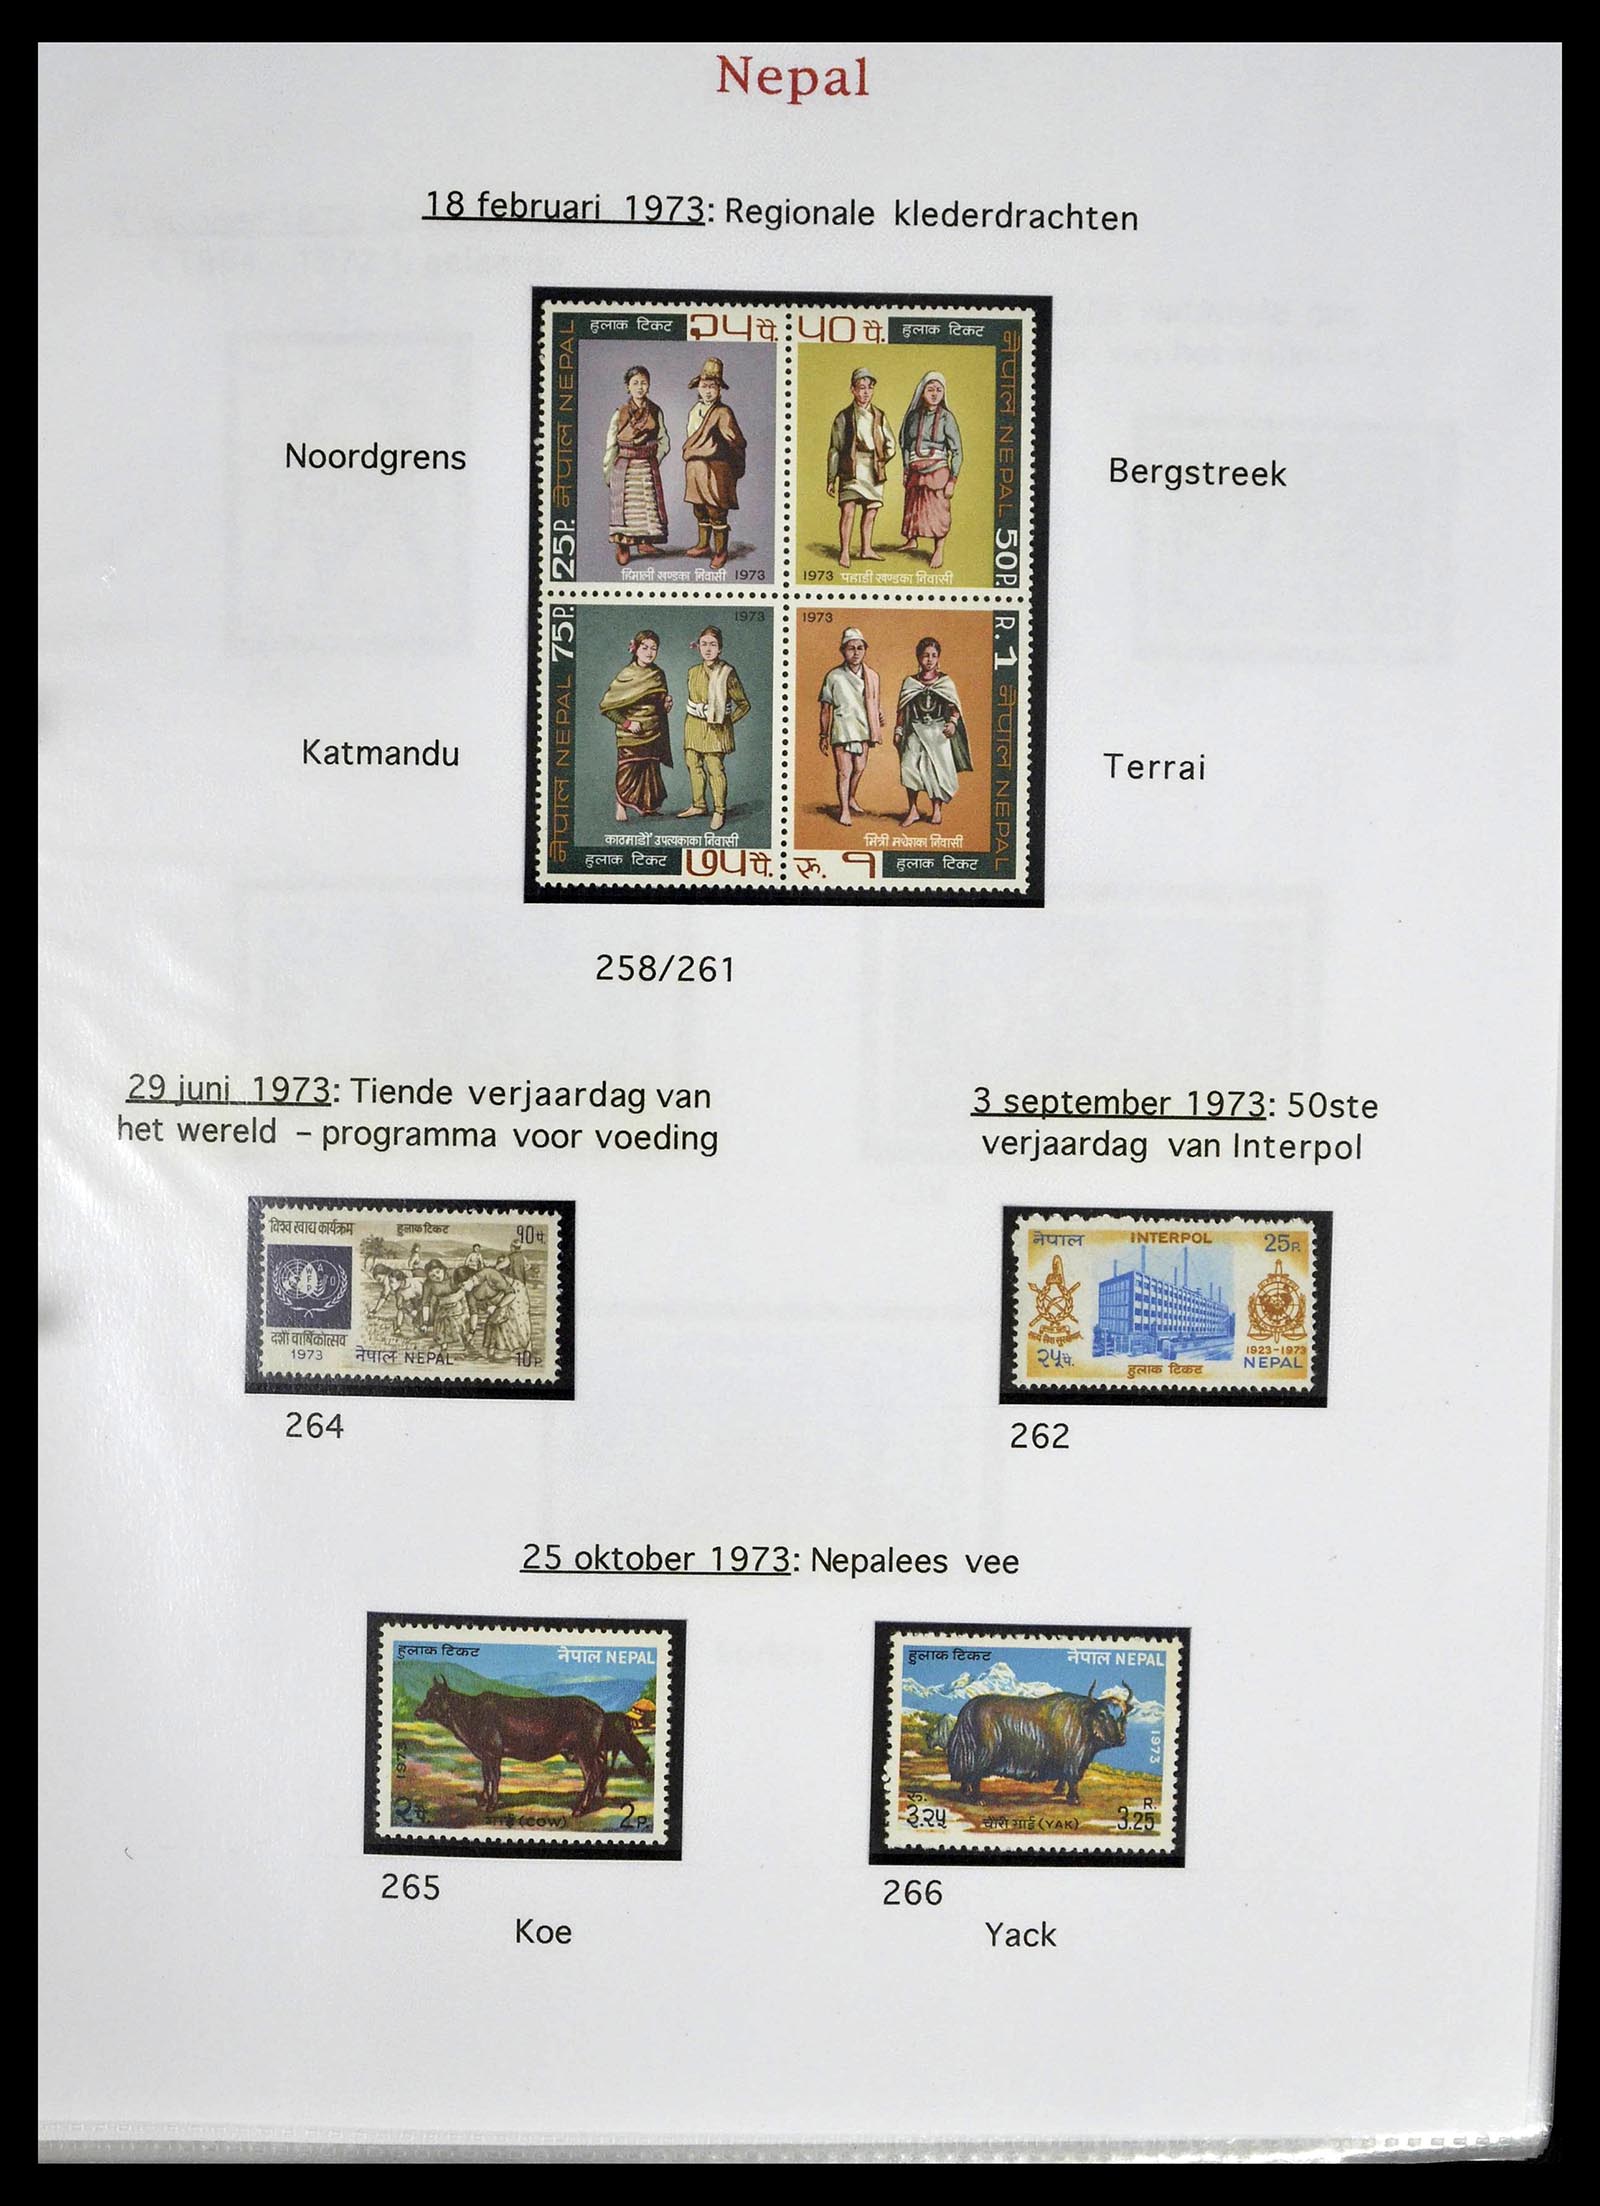 39313 0032 - Stamp collection 39313 Nepal 1881-1999.